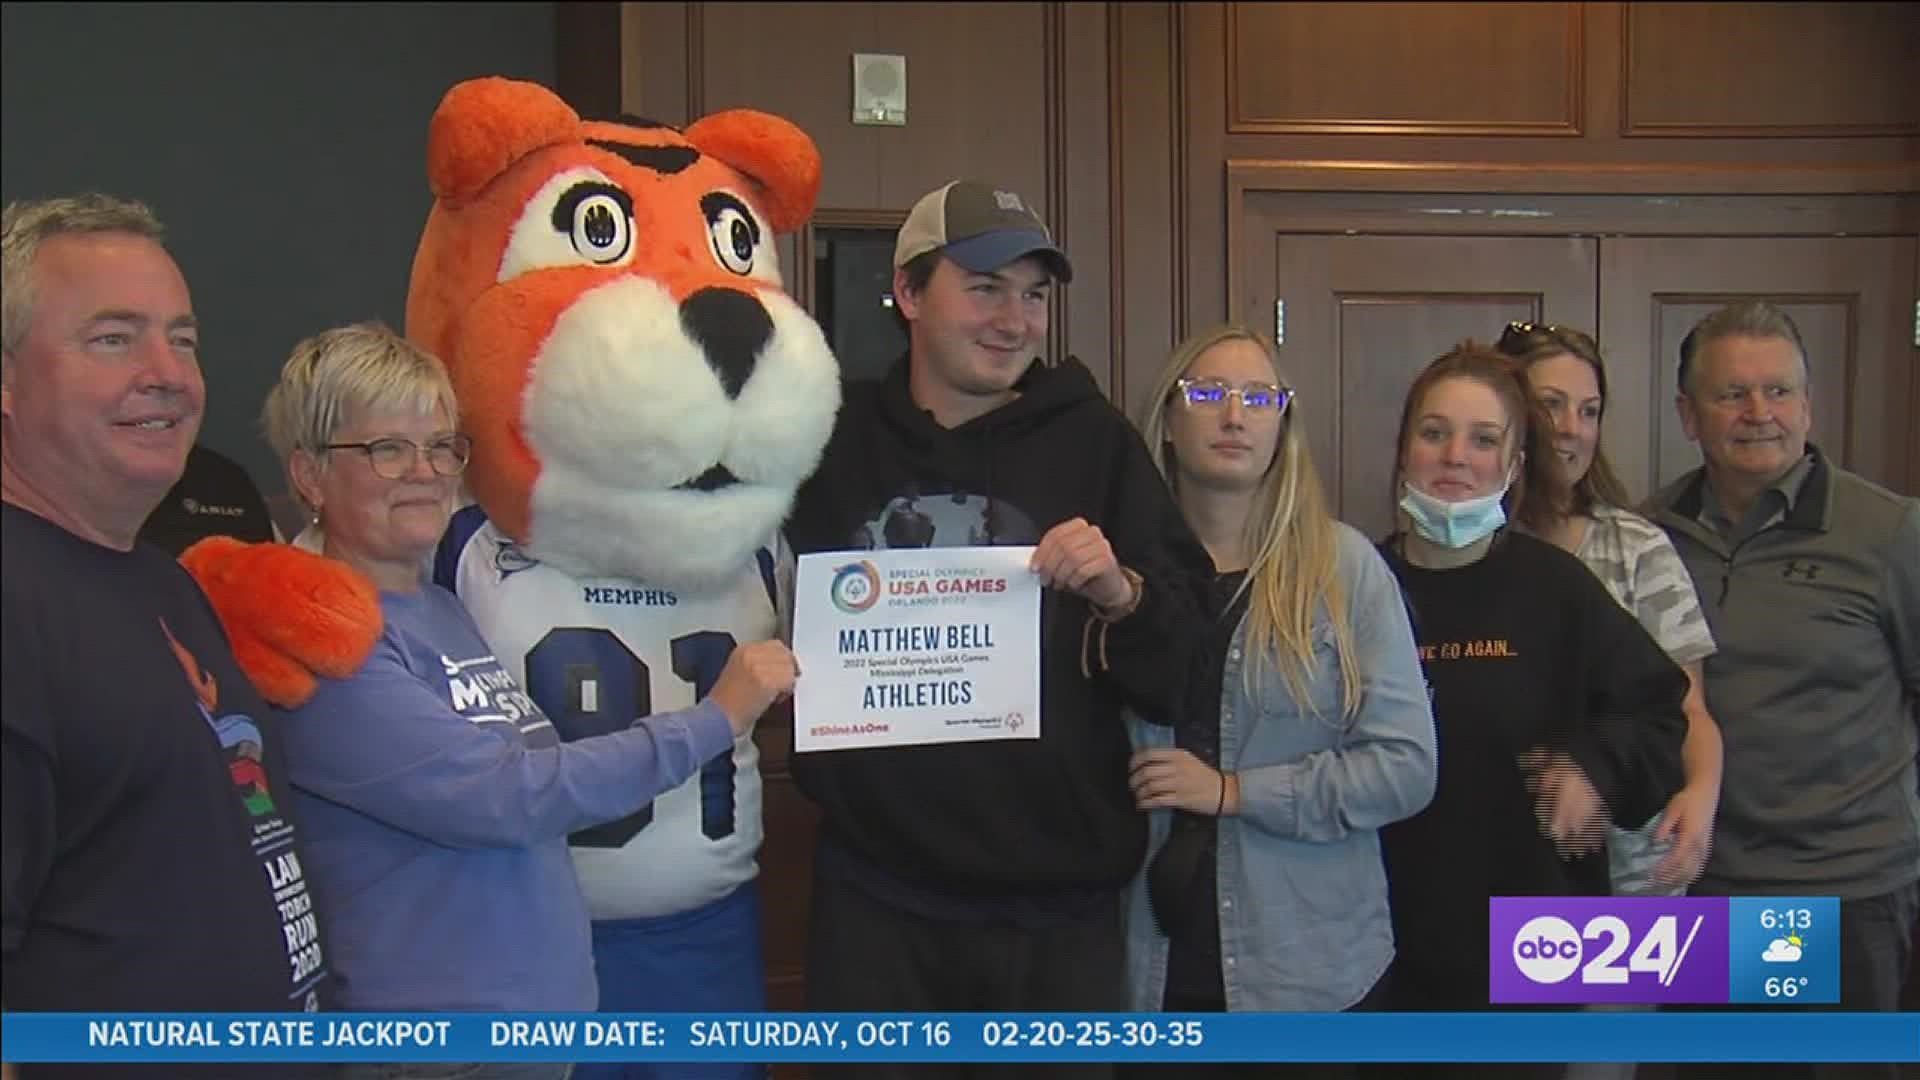 University of Memphis TigerLife student was surprised with an invitation to the 2022 games.